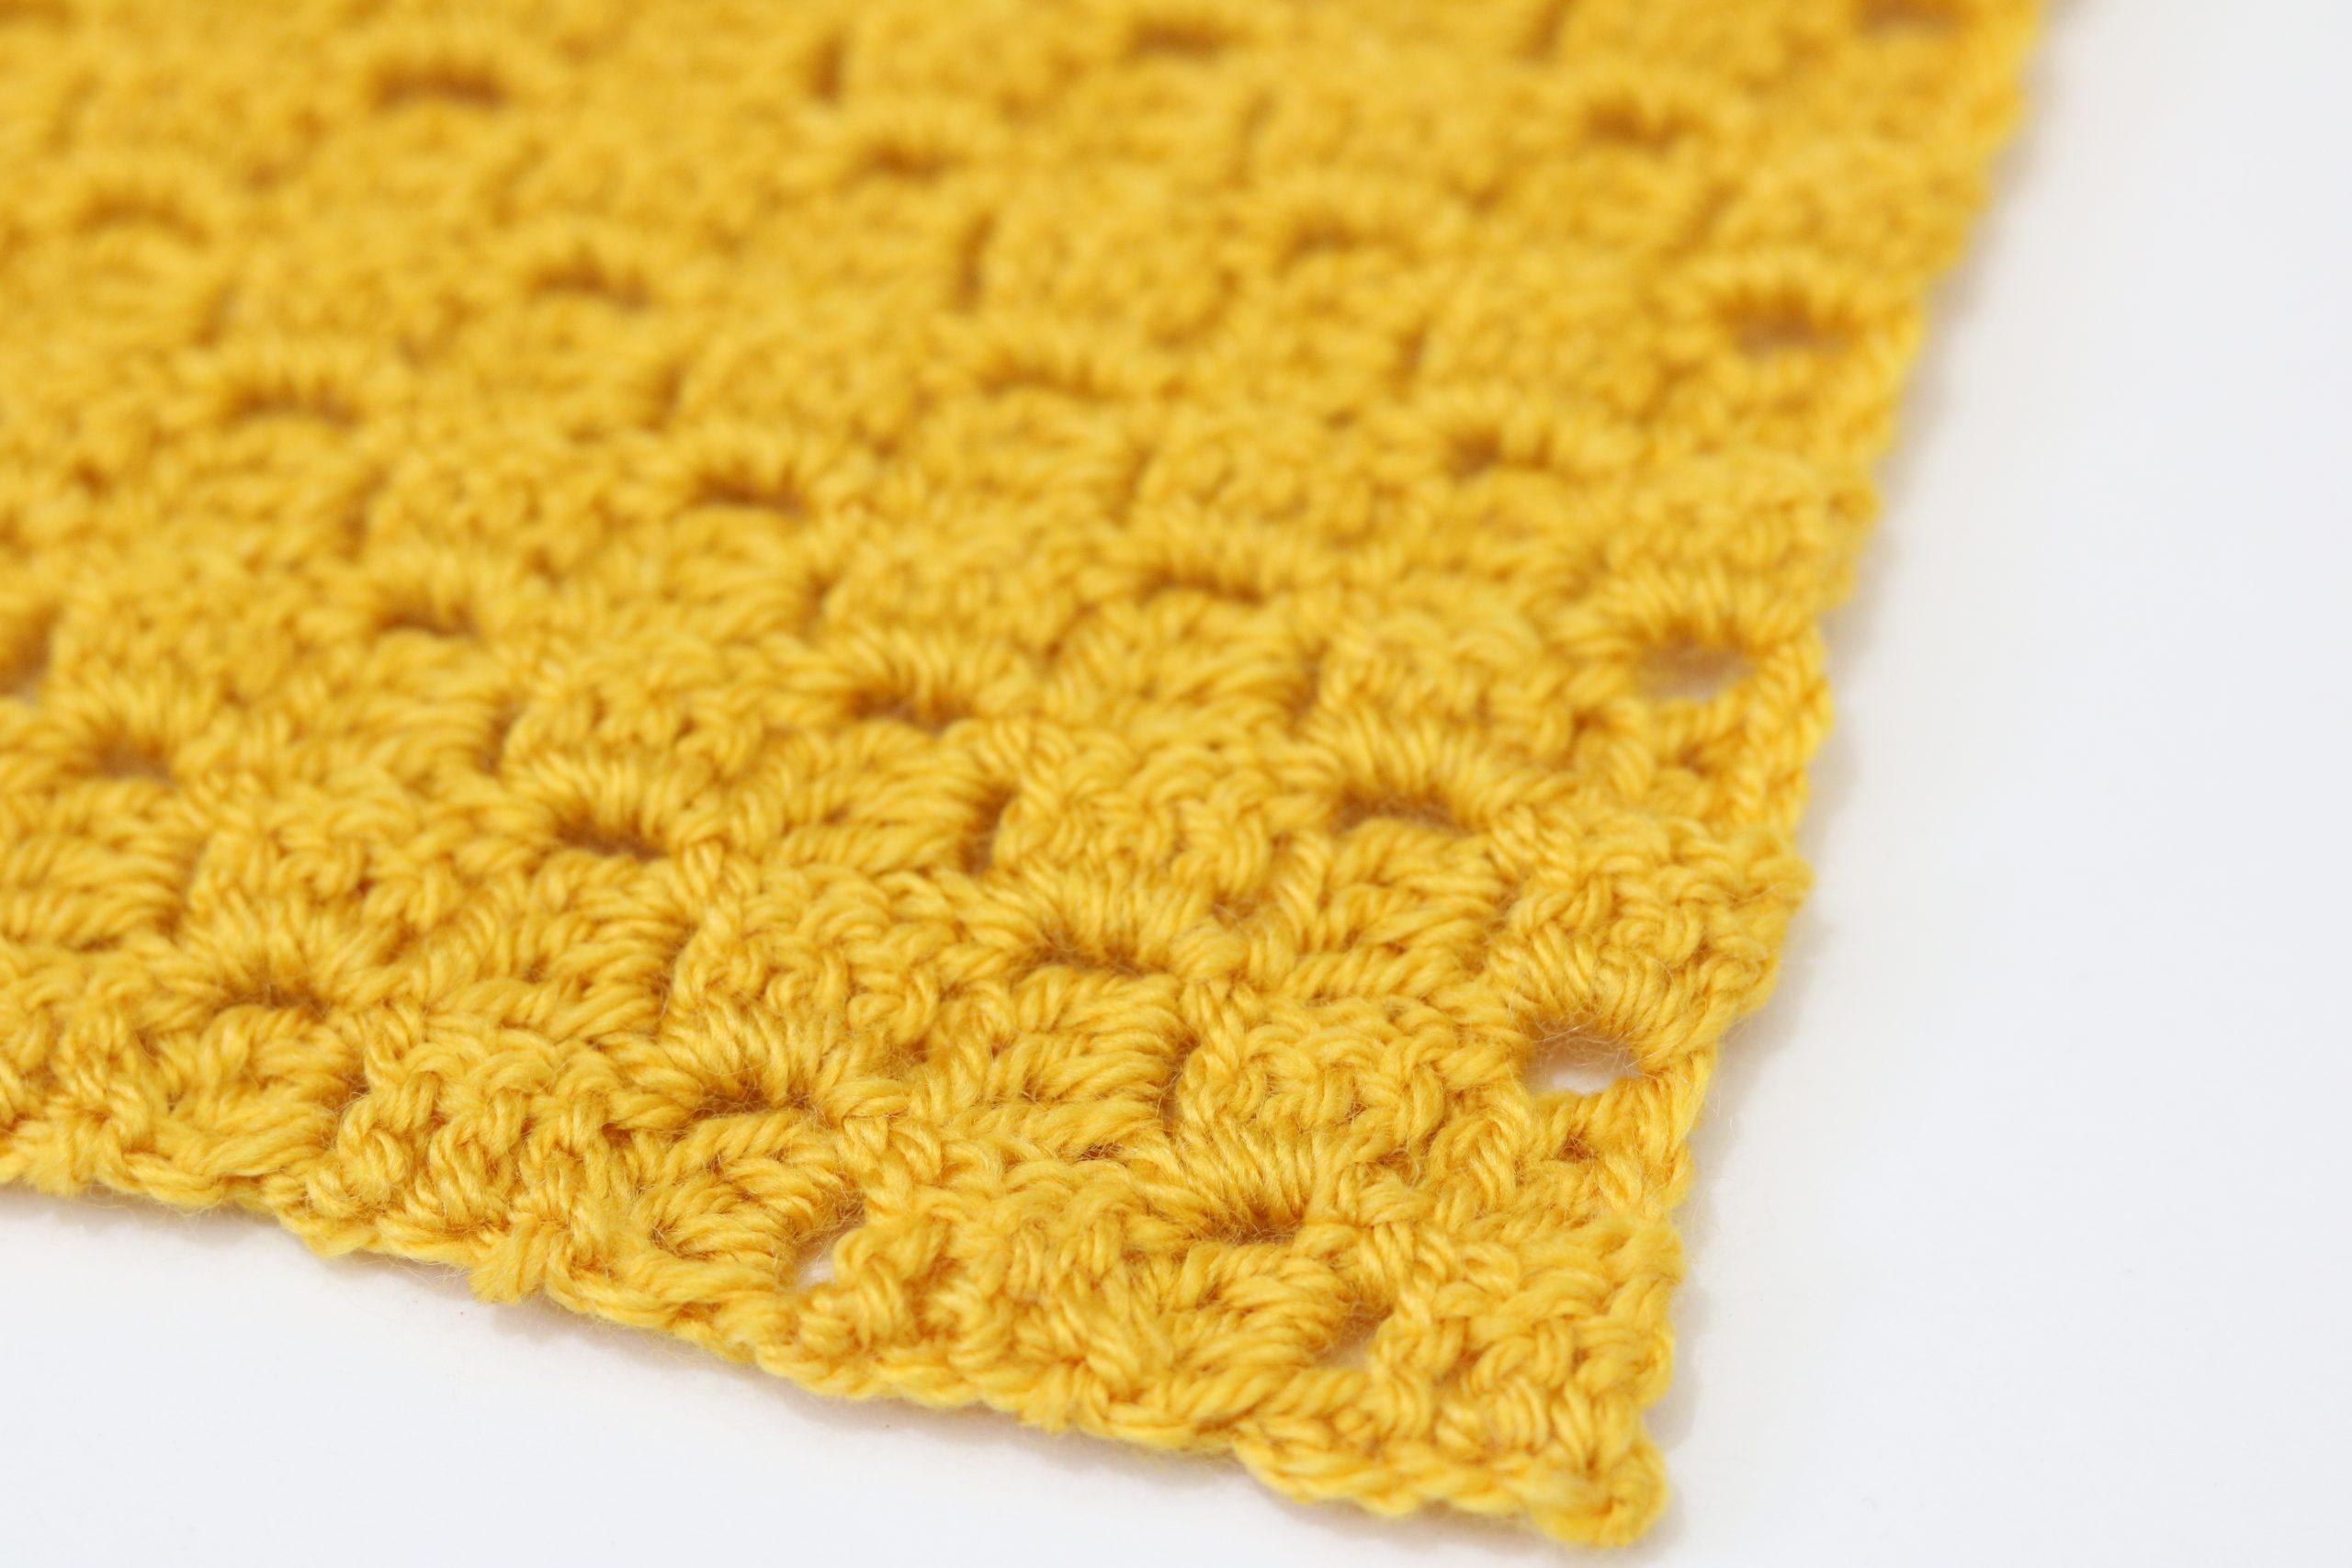 A swatch of corner to corner crochet in yellow yarn on a white background.